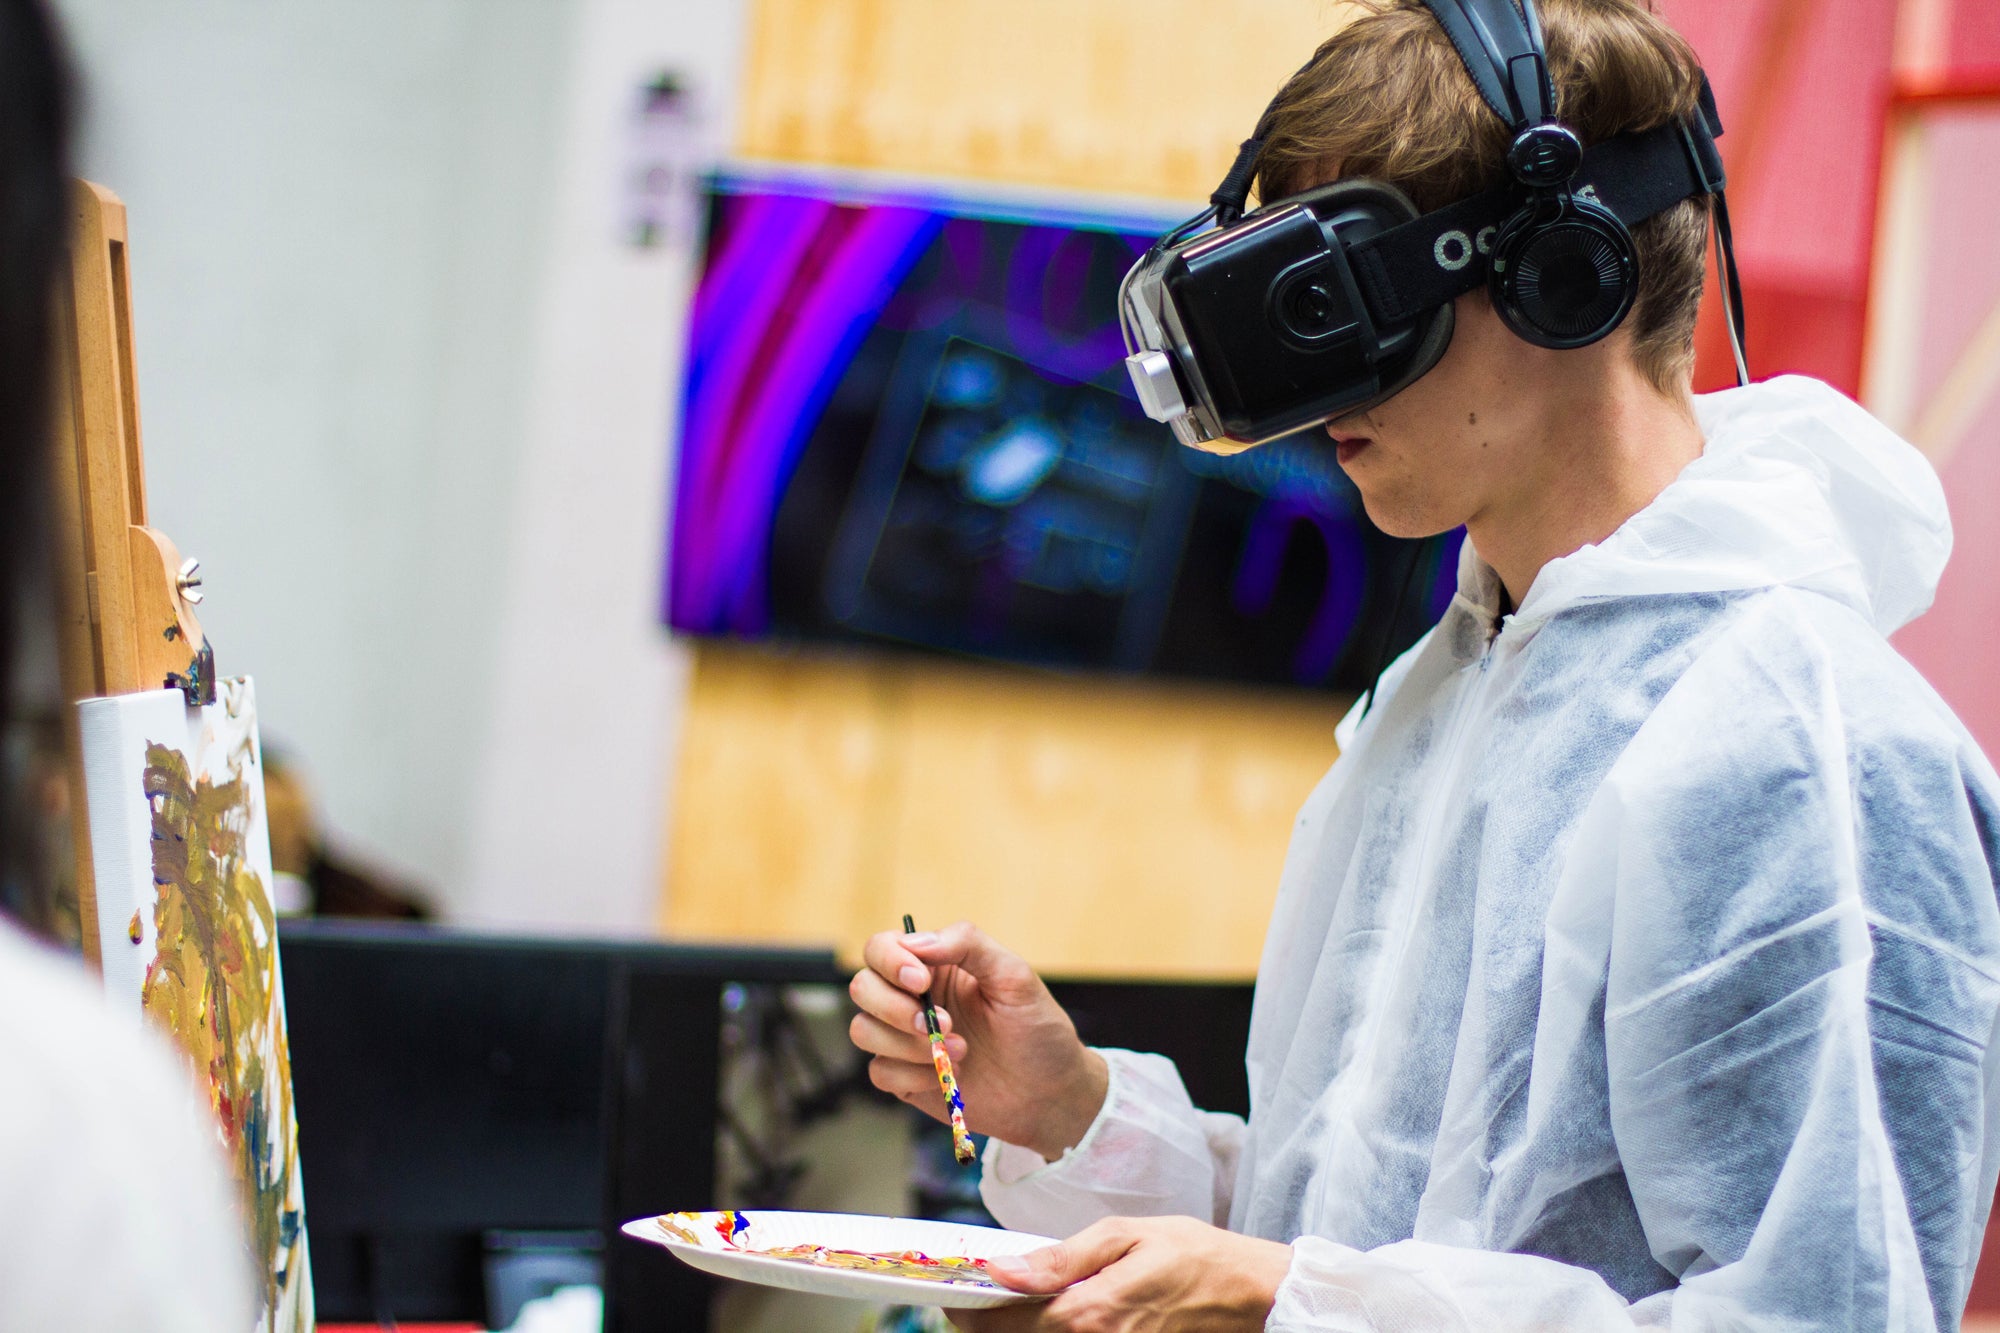 5 Examples of VR Education That Helps Students Focus and Retain Information